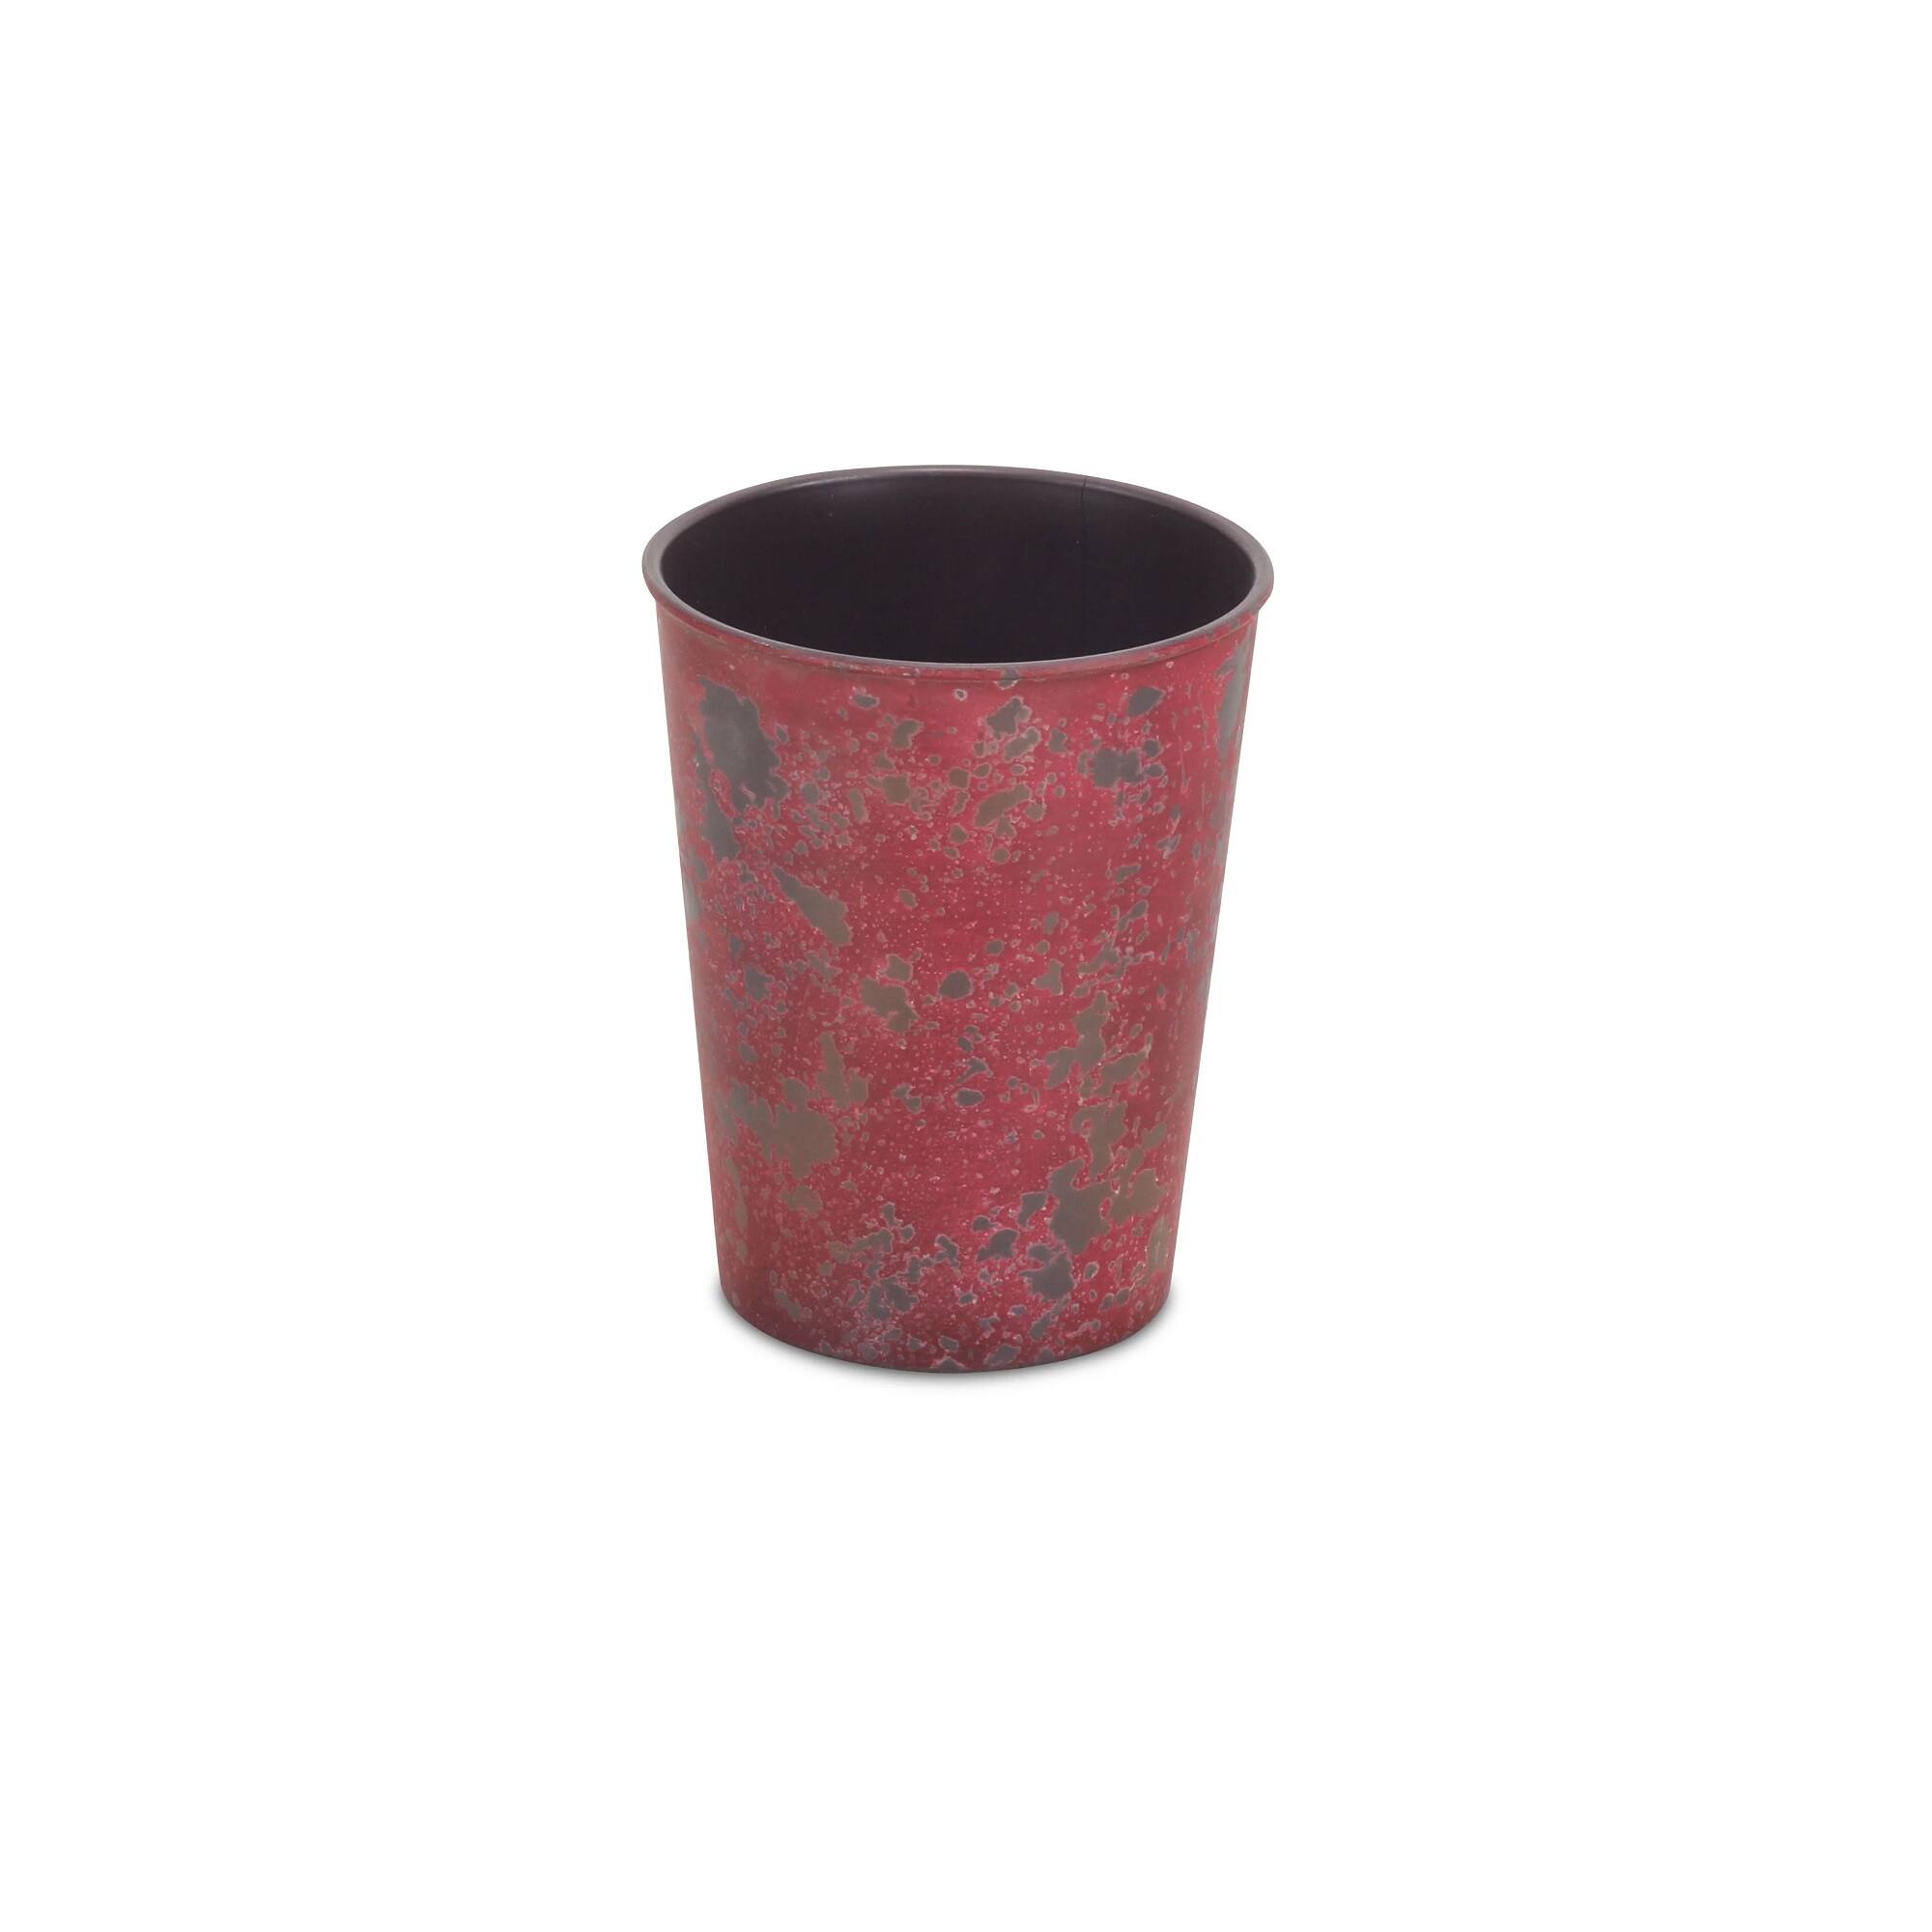 6.25" Rustic Red Round Tapered Planter